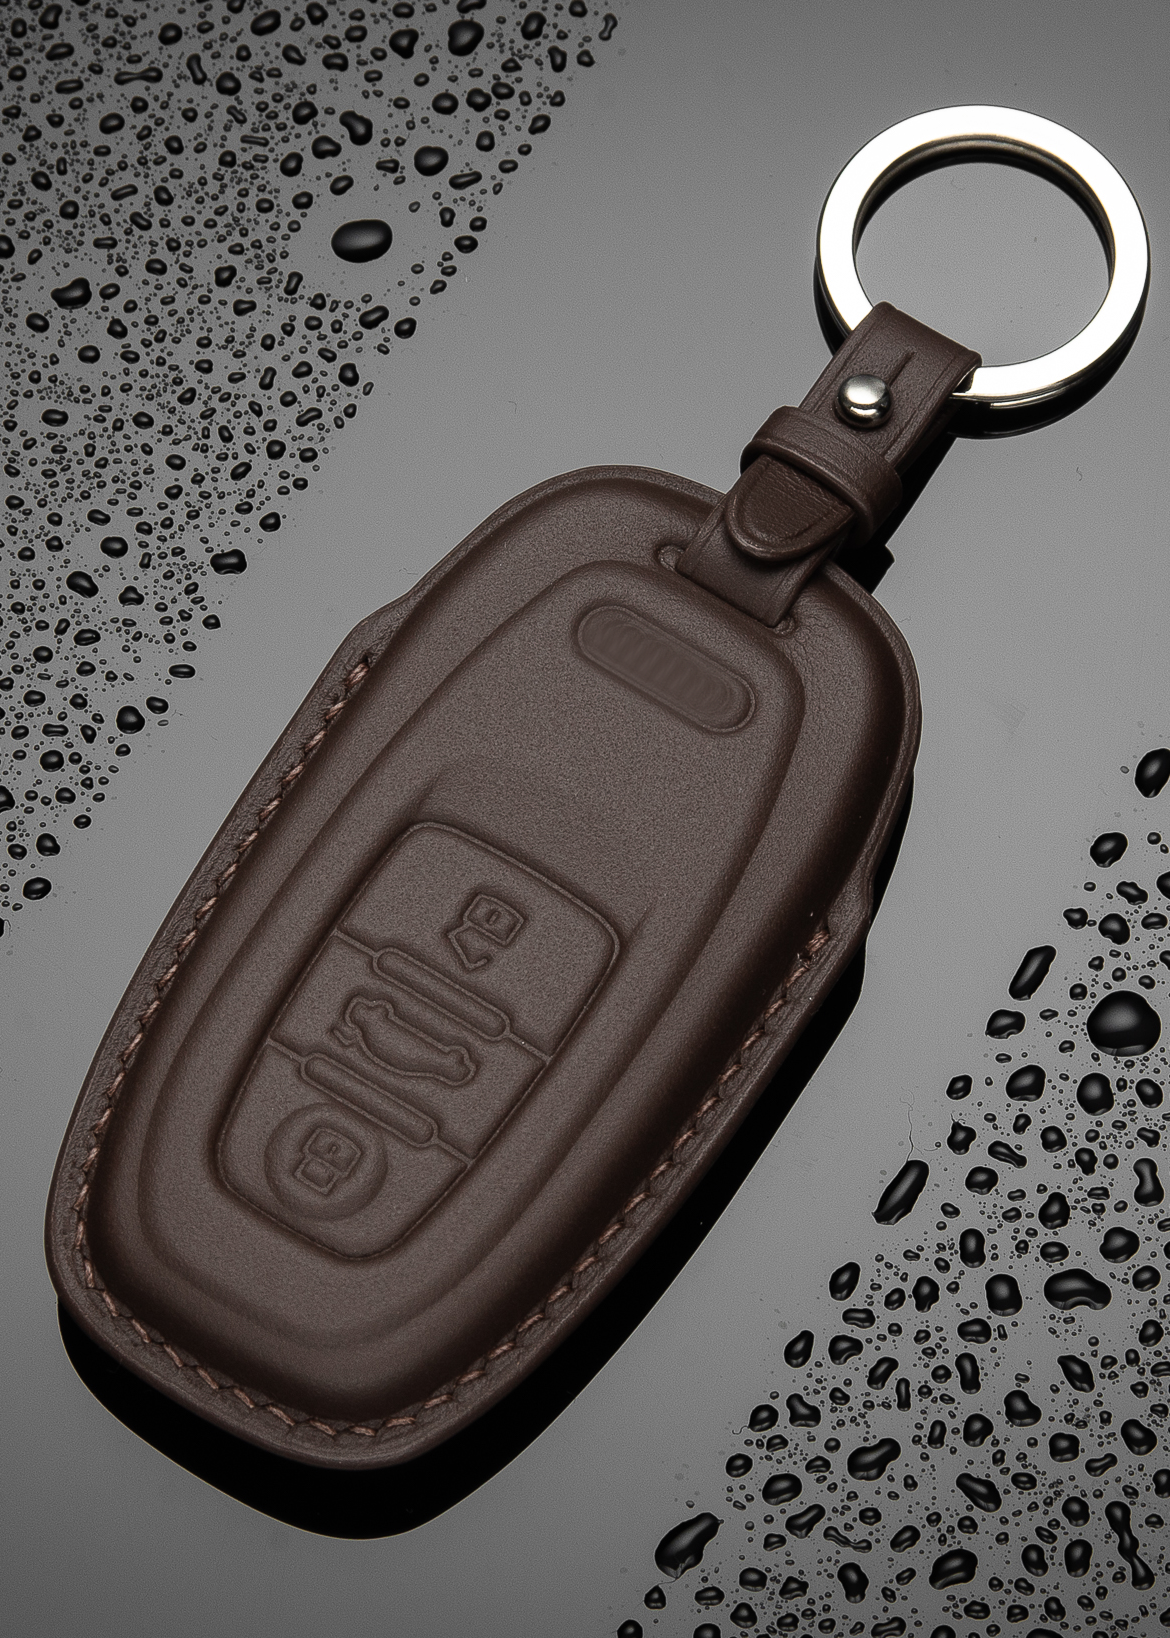 Timotheus for Audi key fob cover case, Compatible with Audi key case, Handmade Genuine Leather for Audi keychains | AU22